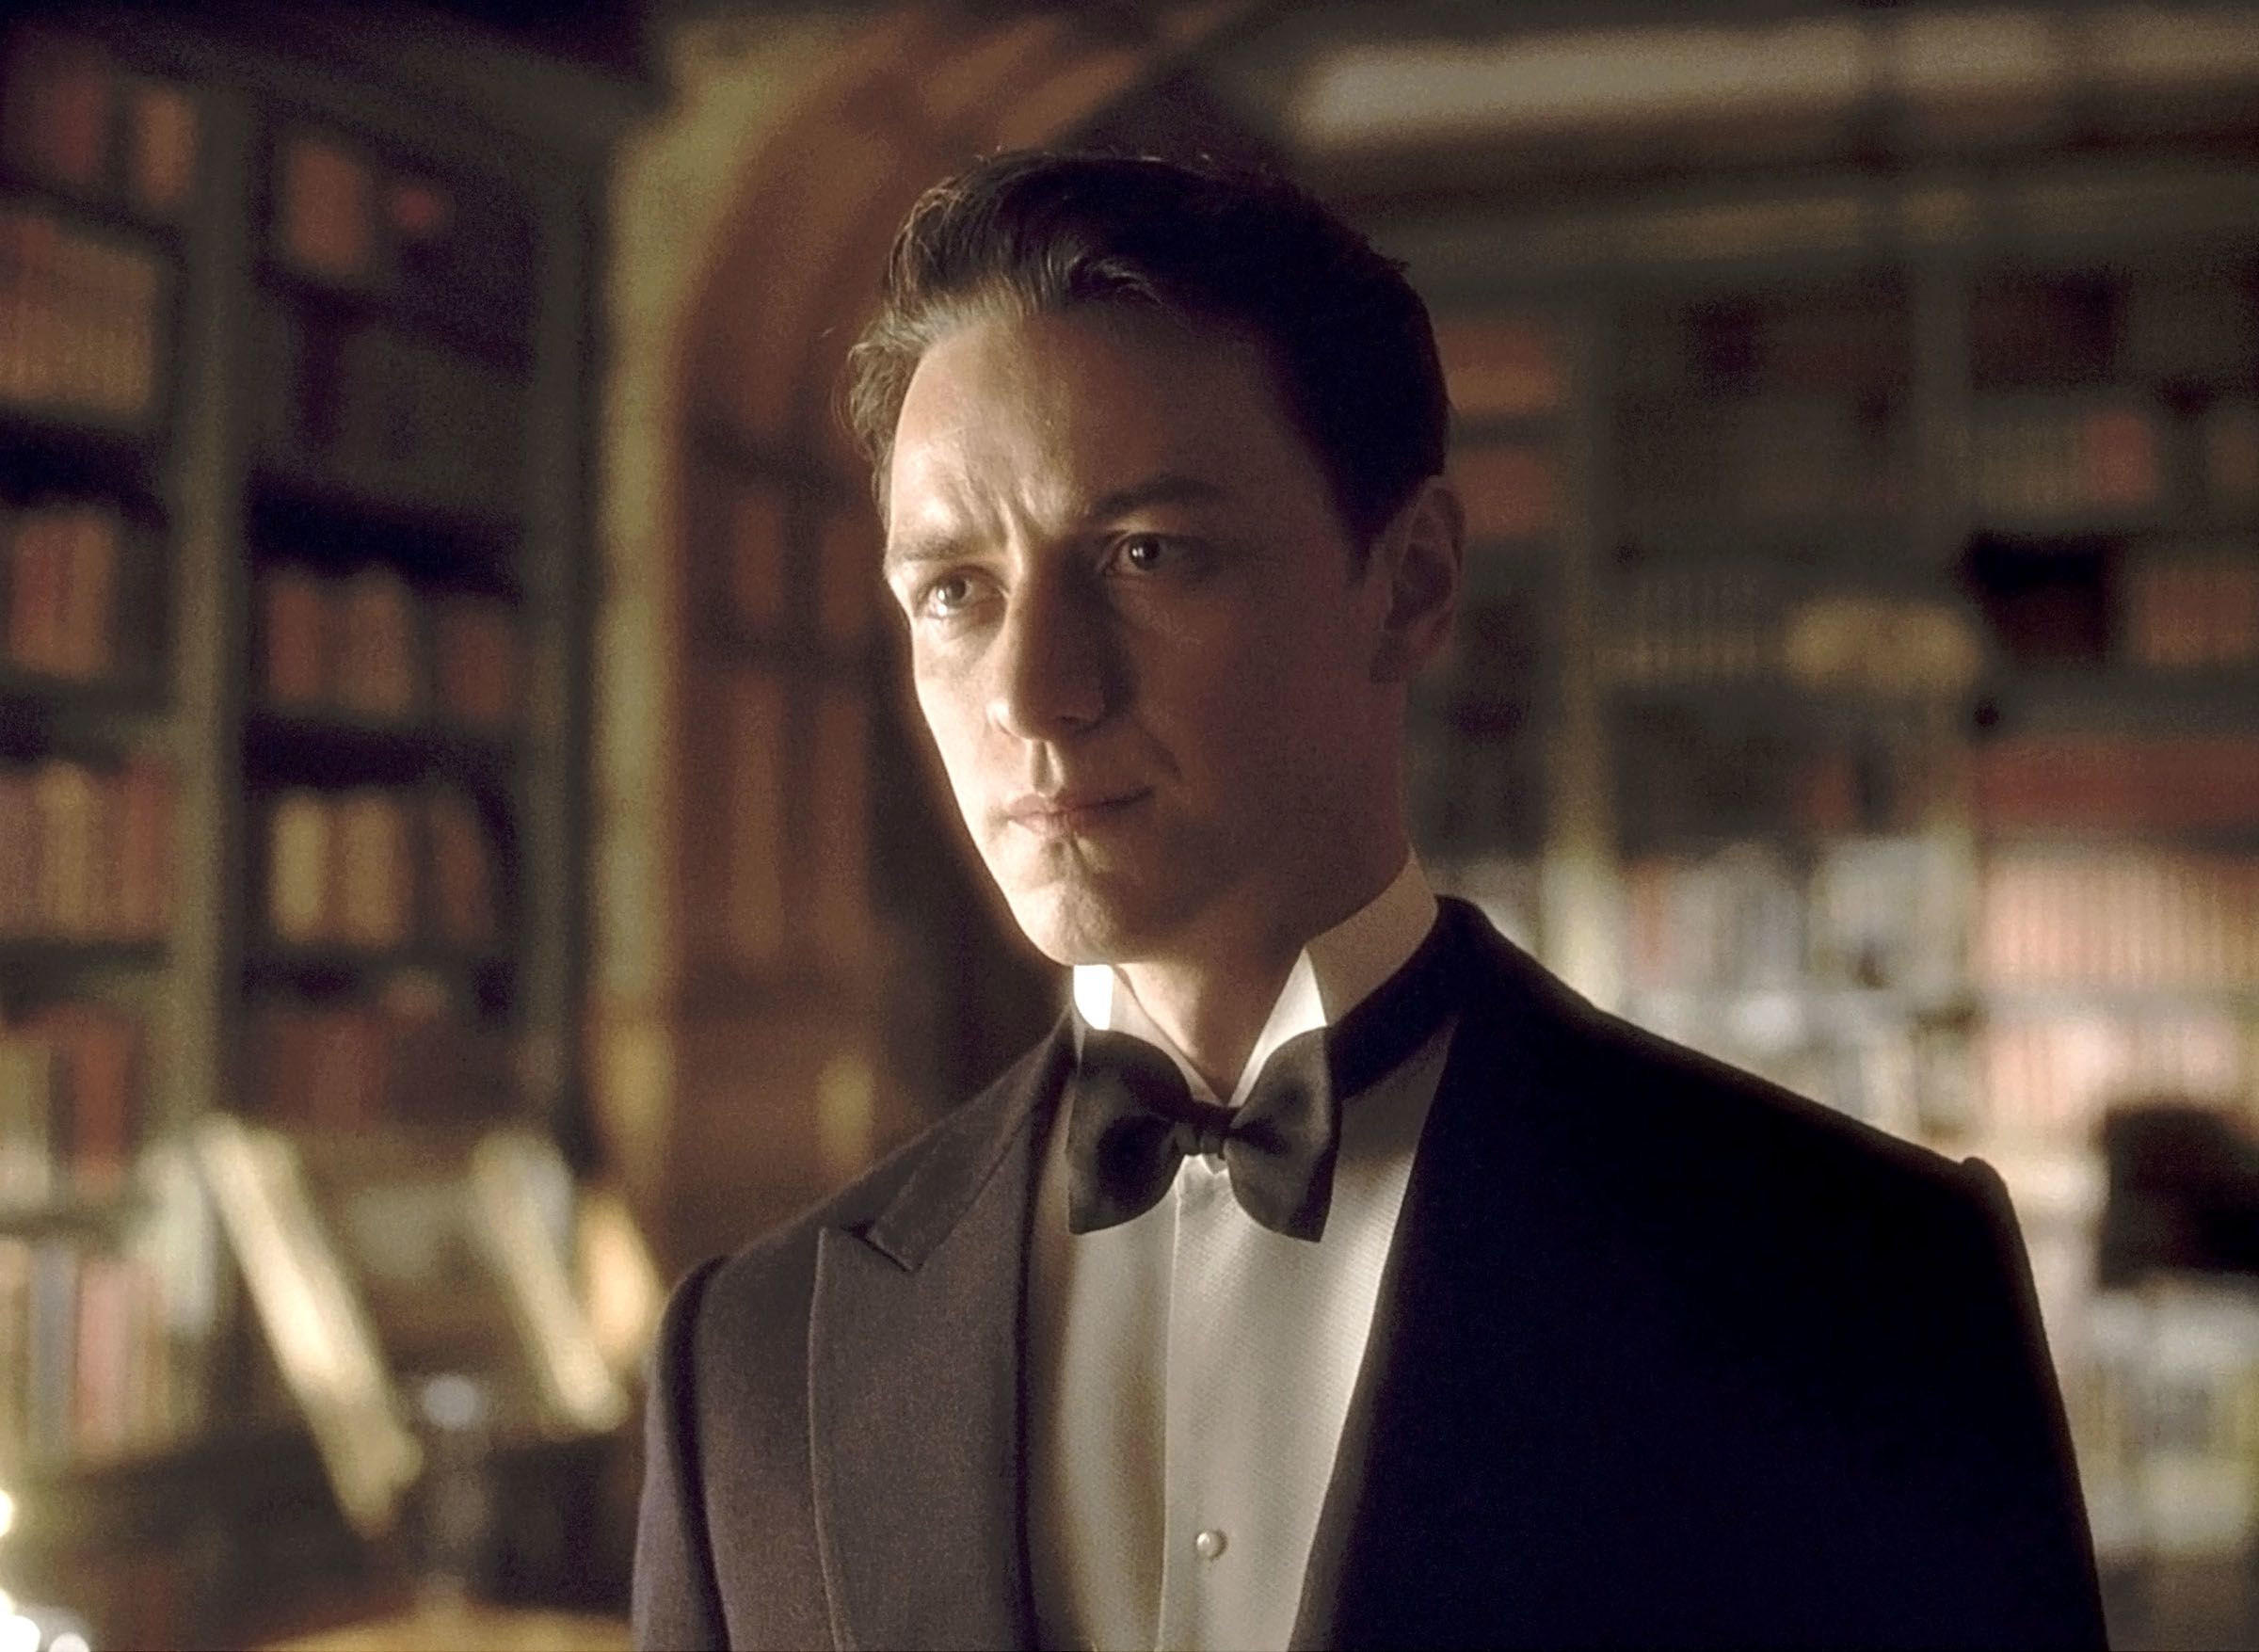 James McAvoy in a period-era tuxedo, standing in a library in a manor home